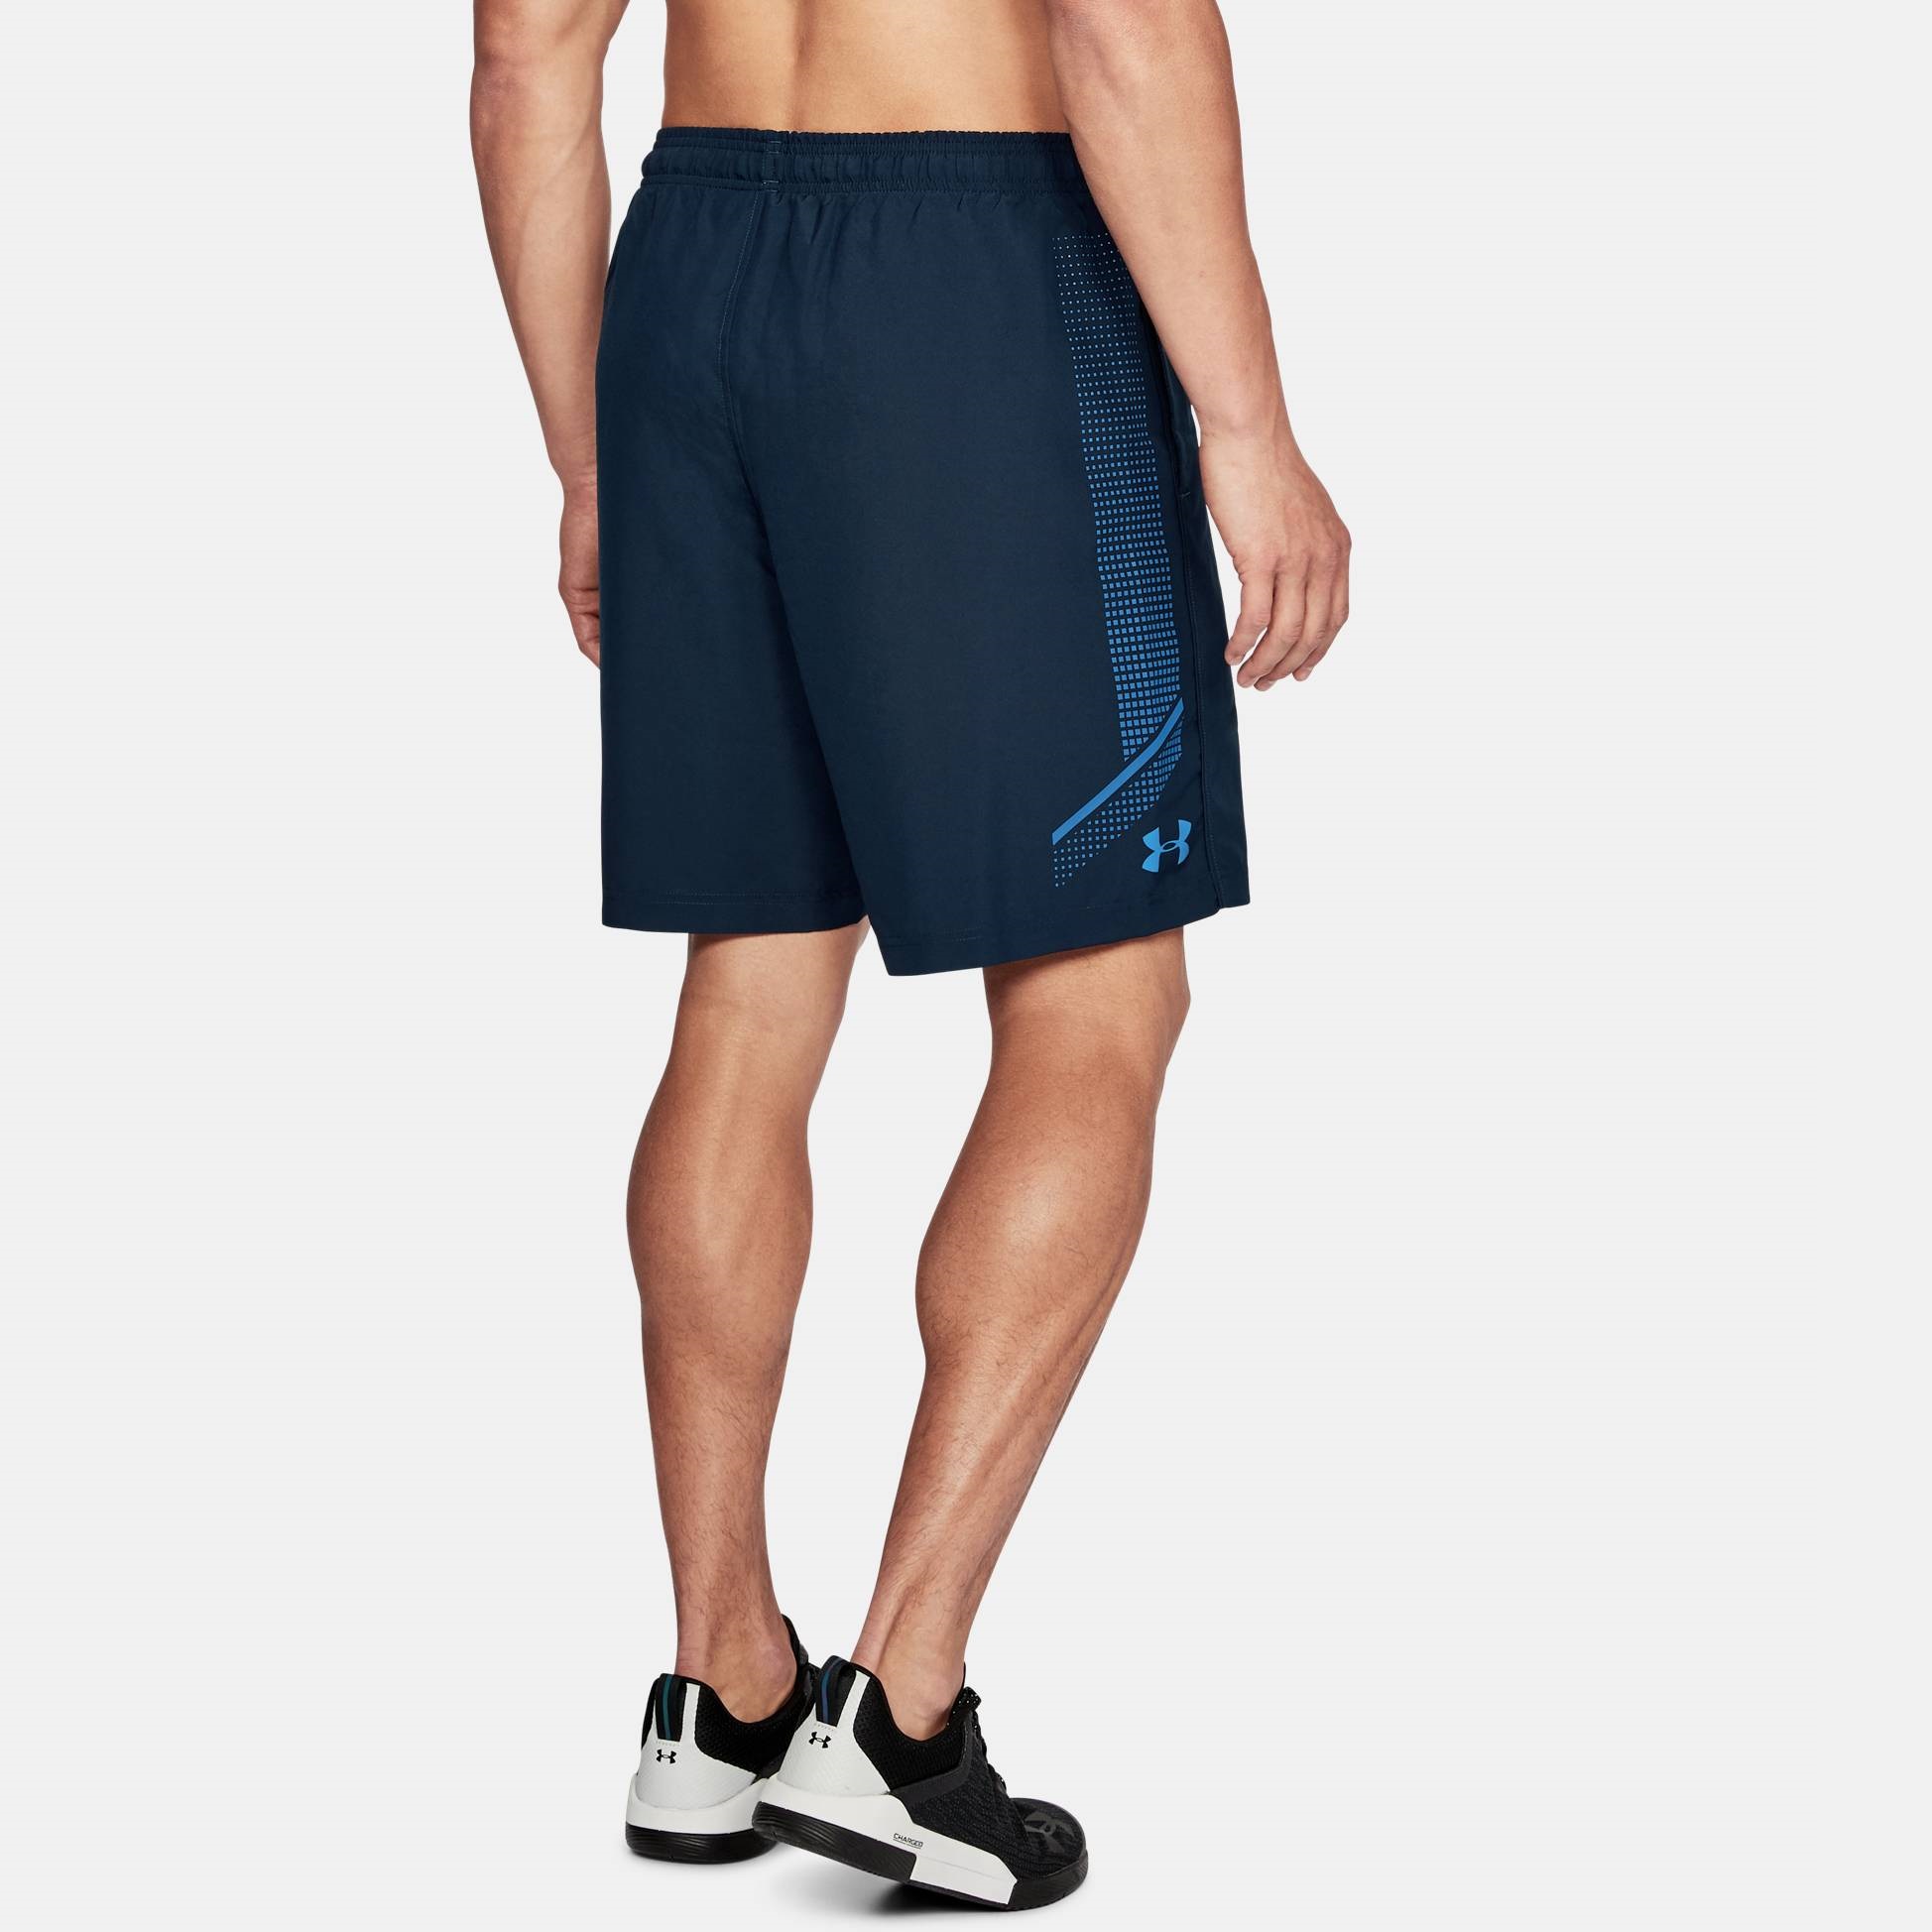  -  under armour Woven Graphic Shorts 9651